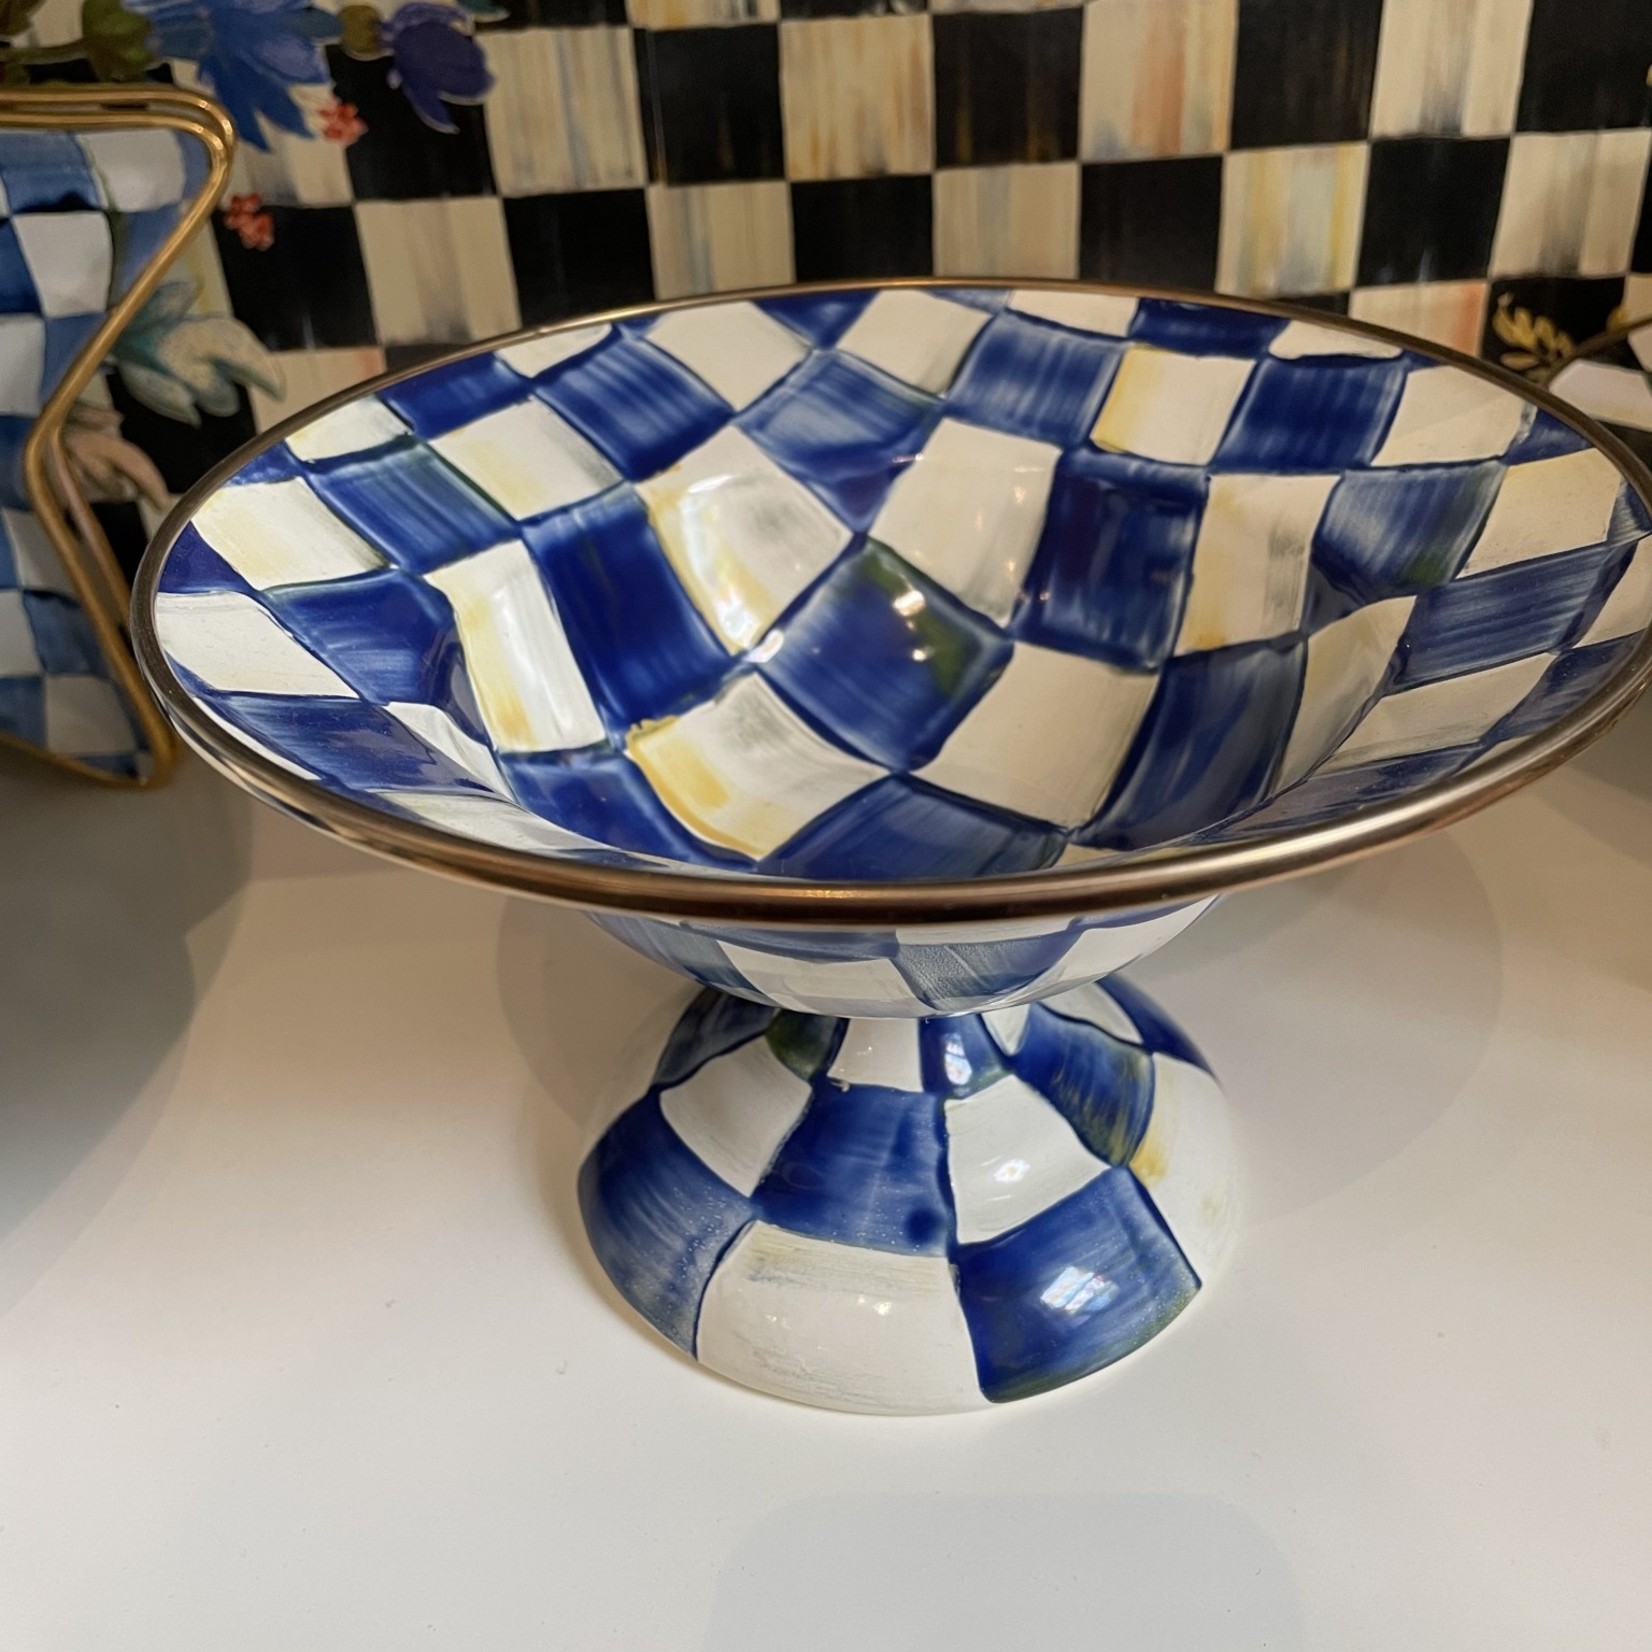 MacKenzie-Childs Royal Check Compote - Small